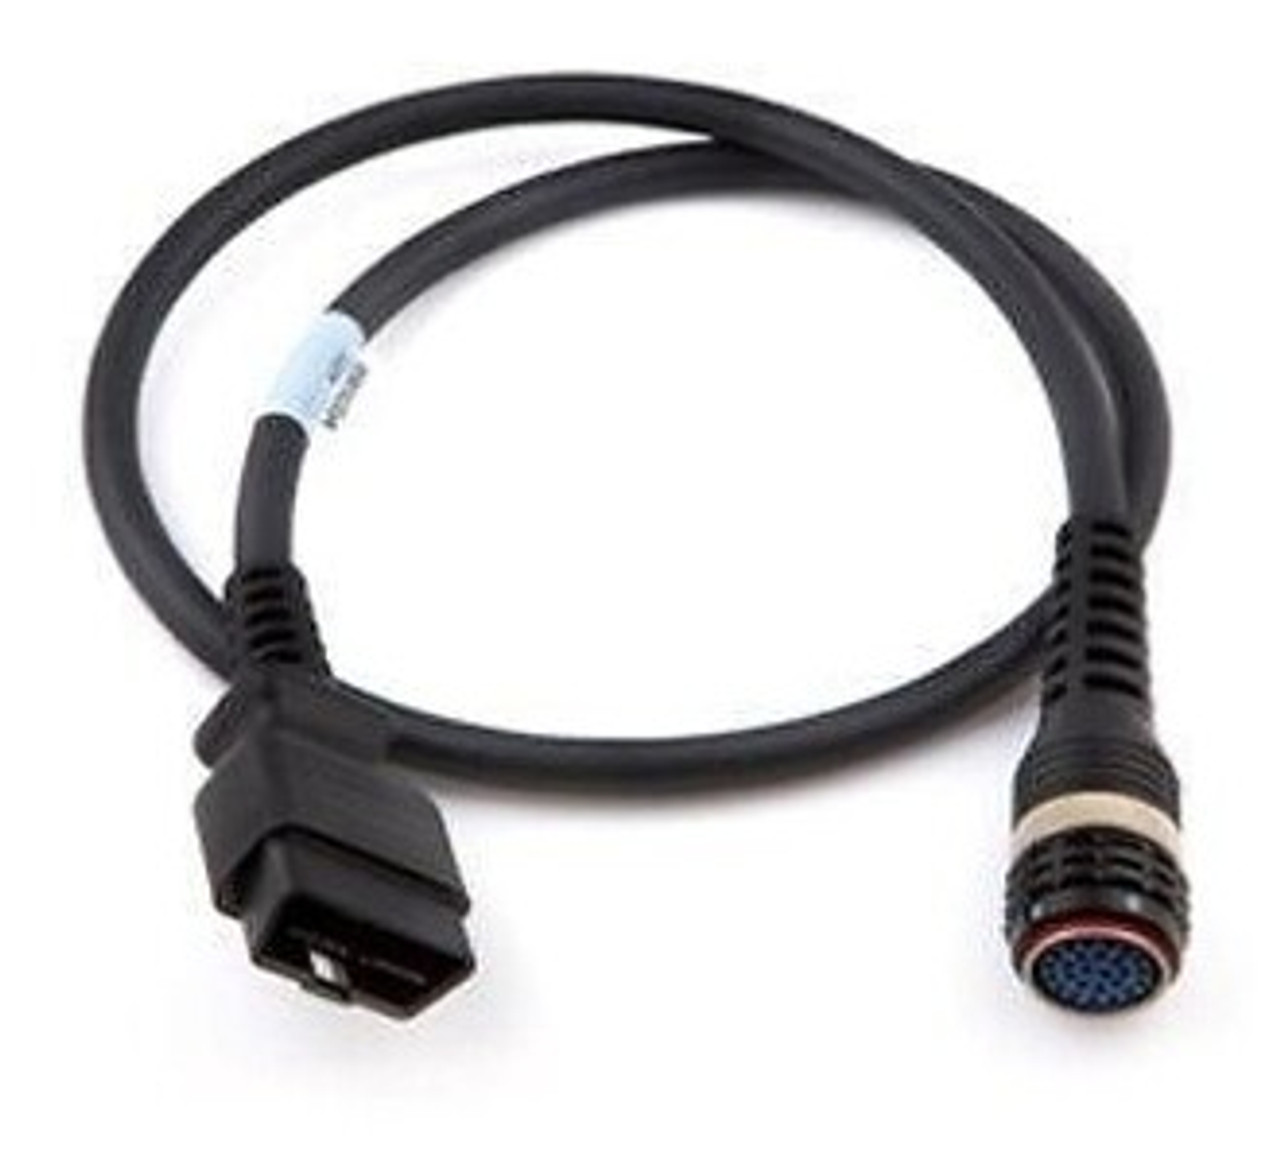 Volvo VOCOM II 88894000 Adapter with Datalink 88890313 USB Cable, 88894001  OBD Cable and 88890315 Deutsch (